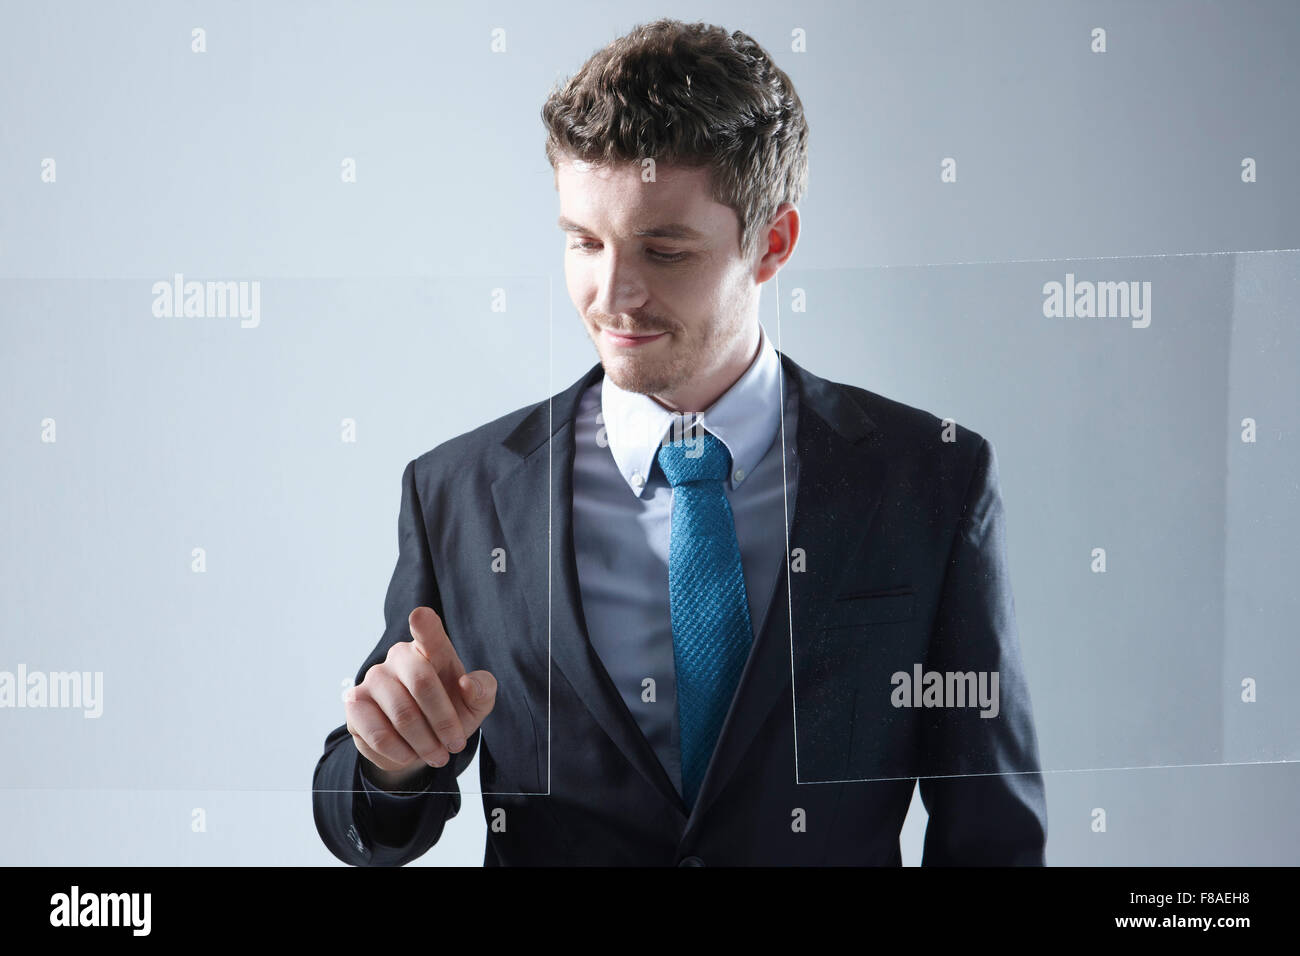 Business man working on a touch screen with one hand Stock Photo